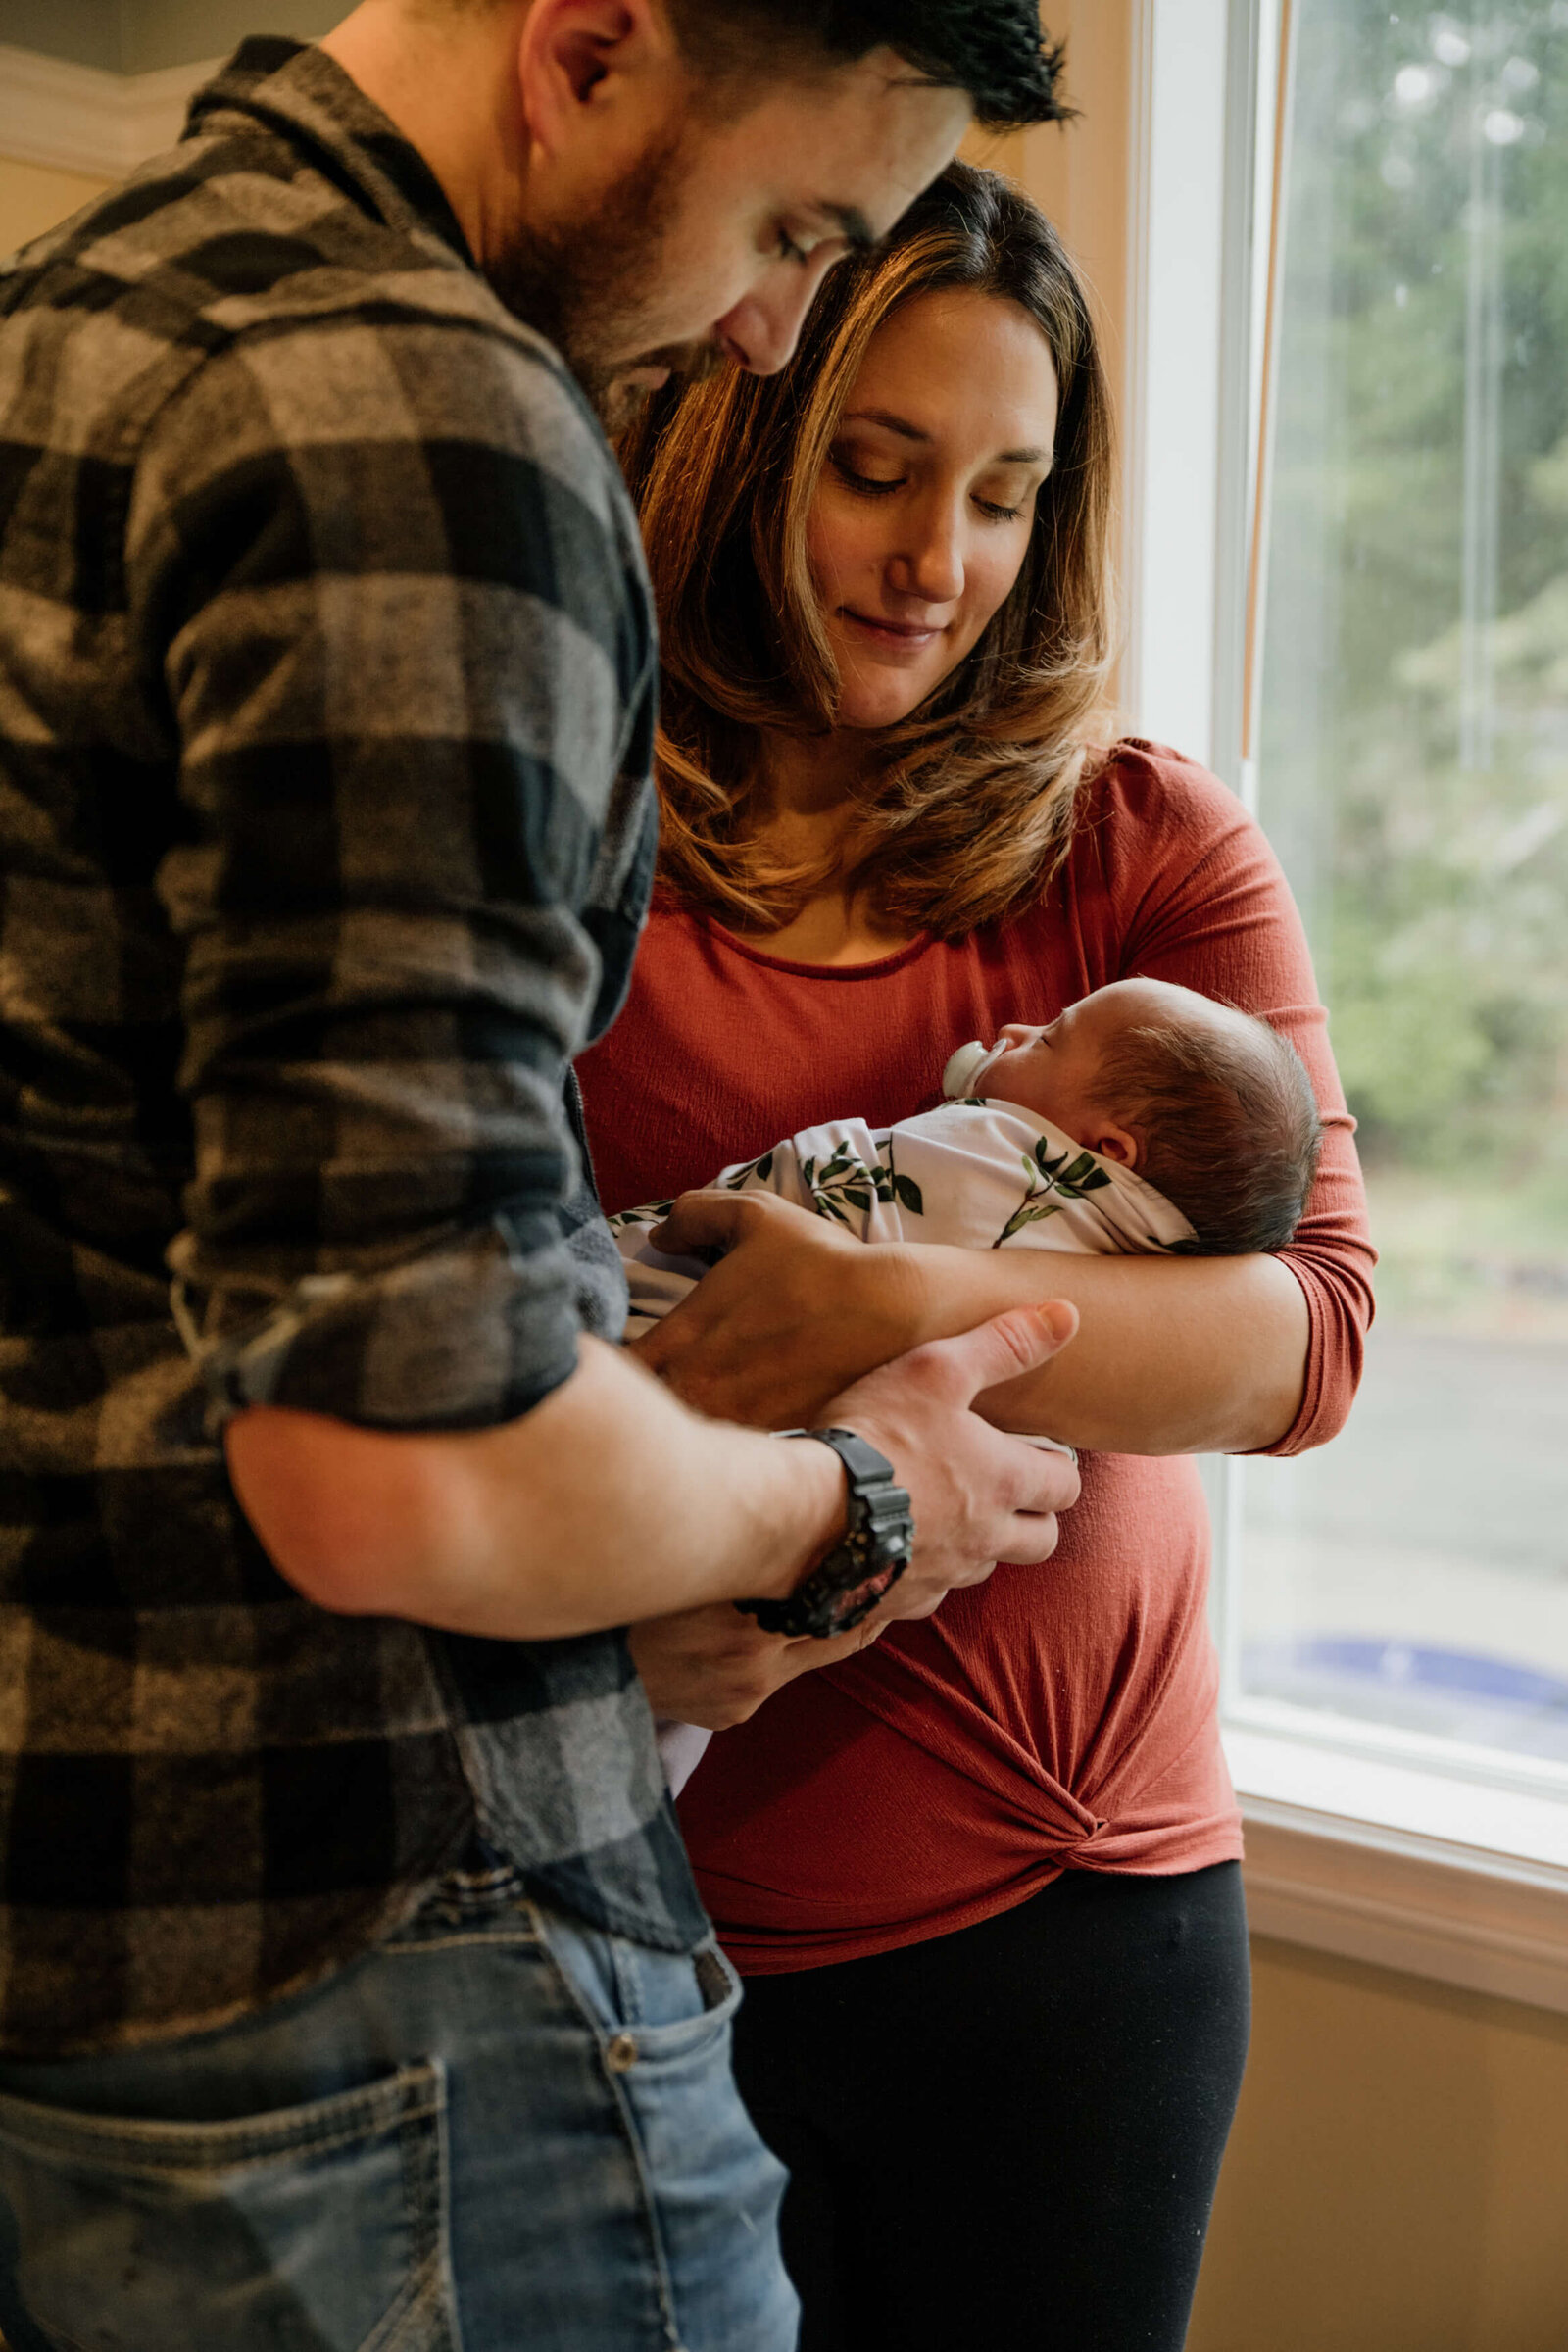 Couple holding baby in their arms.